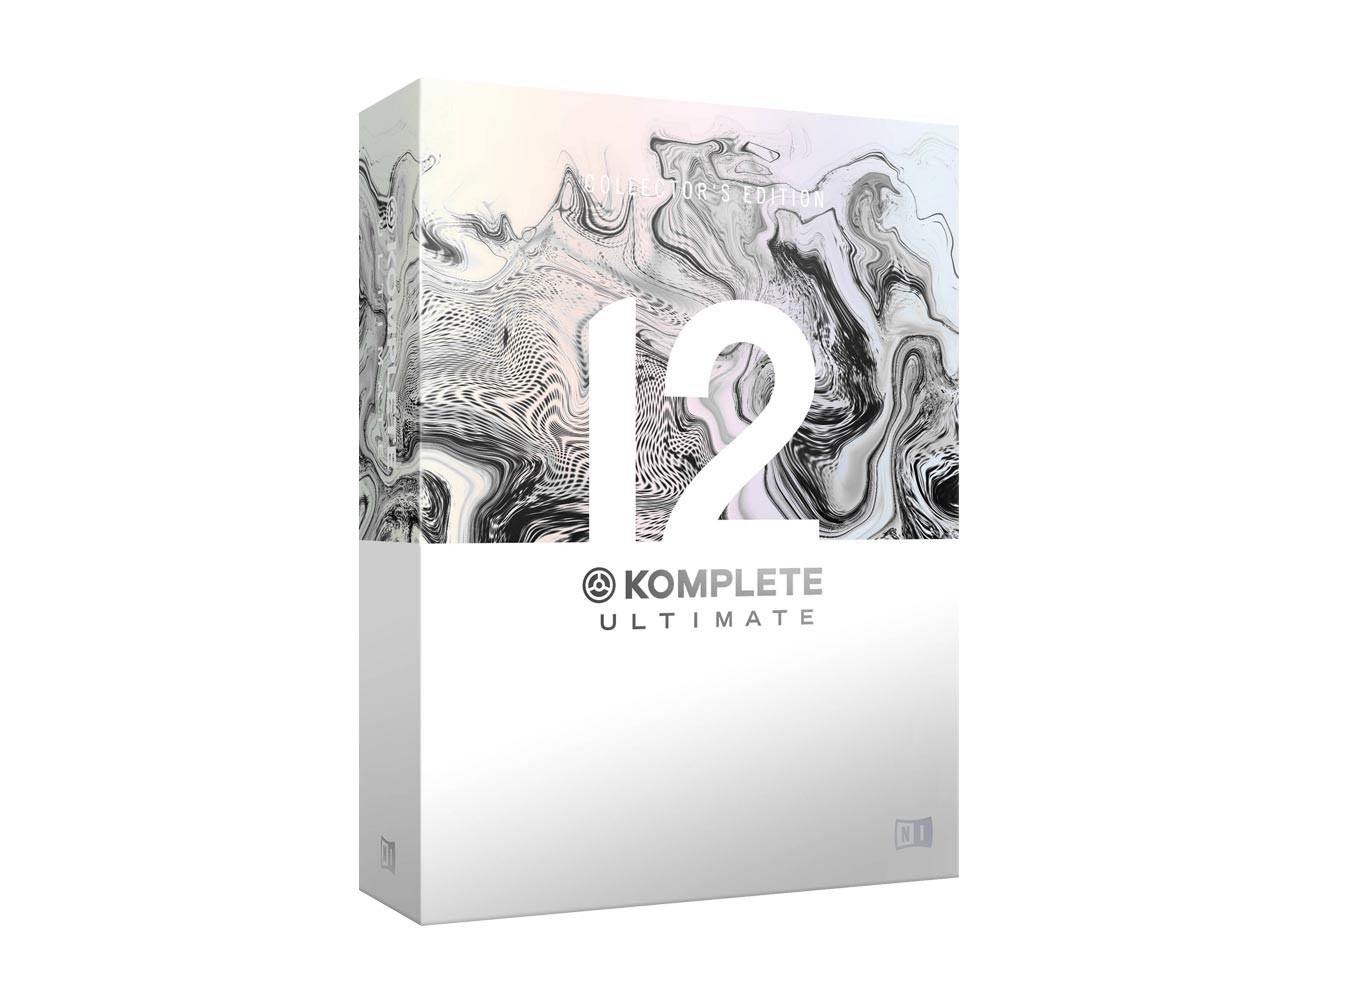 Komplete 12 Collector’s Edition UPG from KU8-12